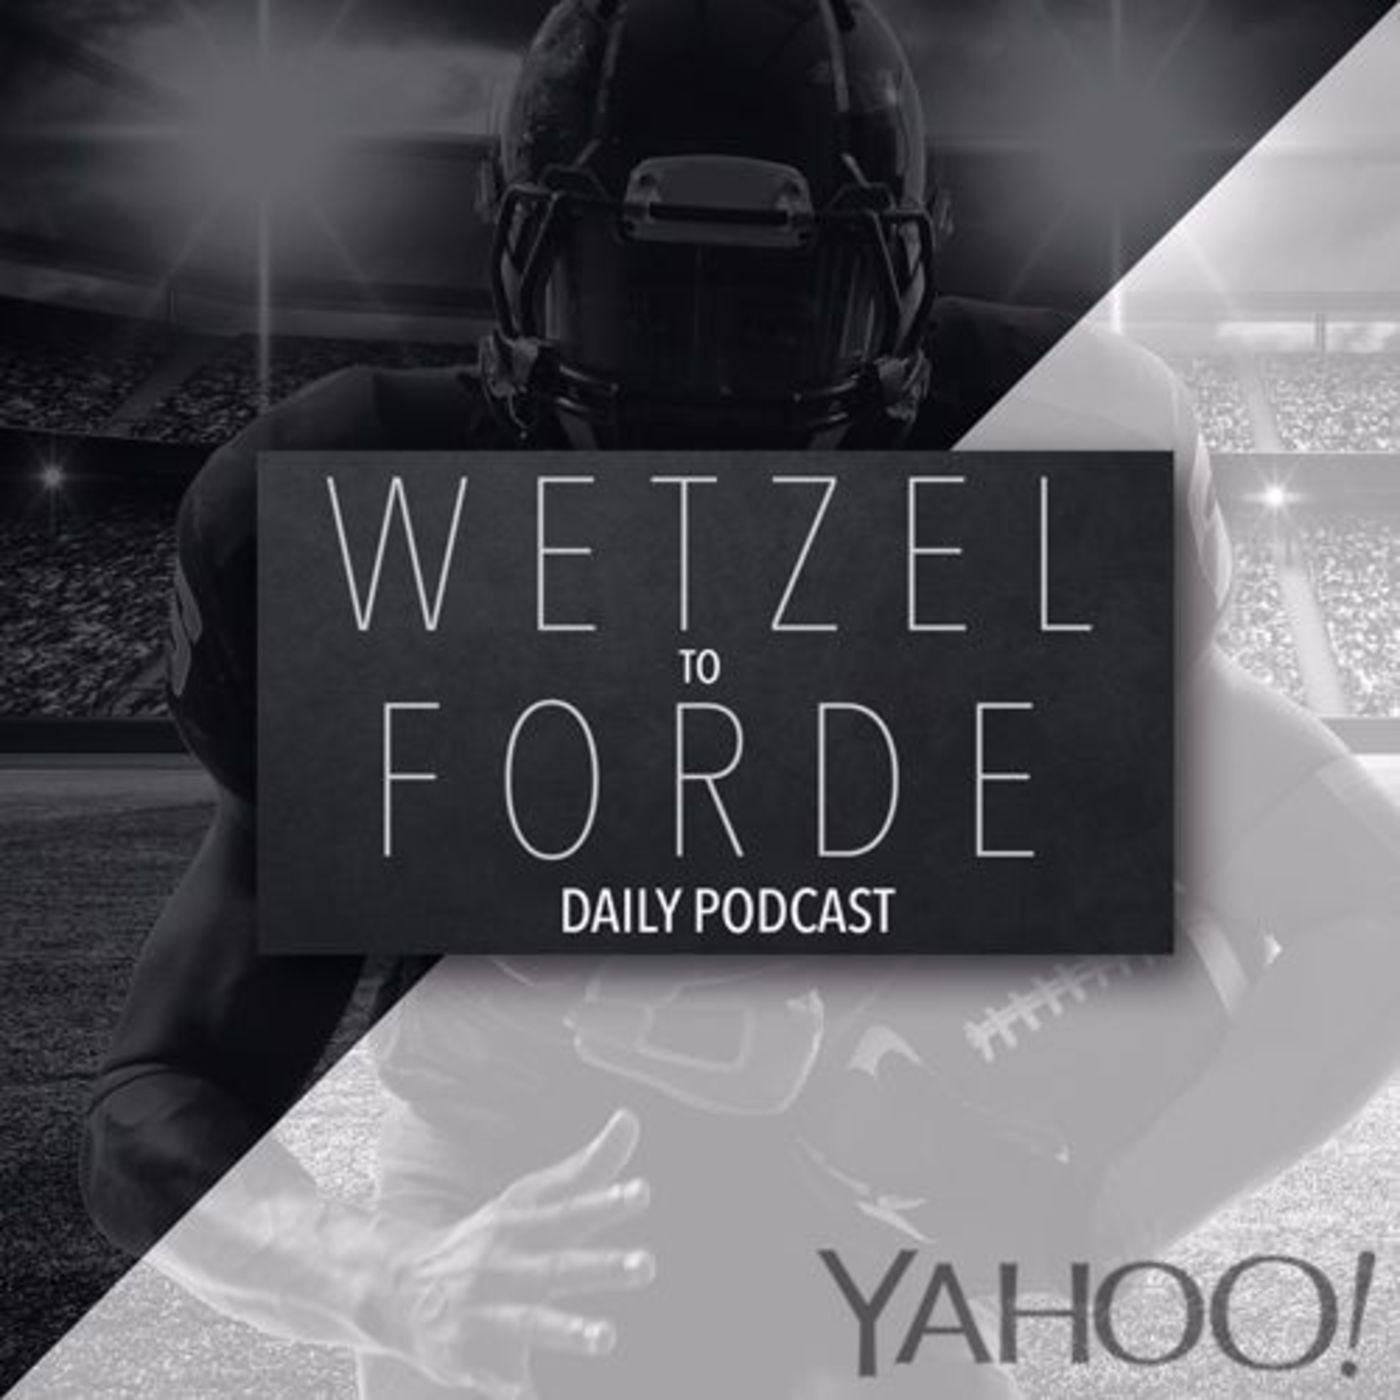 Chip to San Francisco. Playoff picks. Wetzel To Forde (1 - 15 - 16)